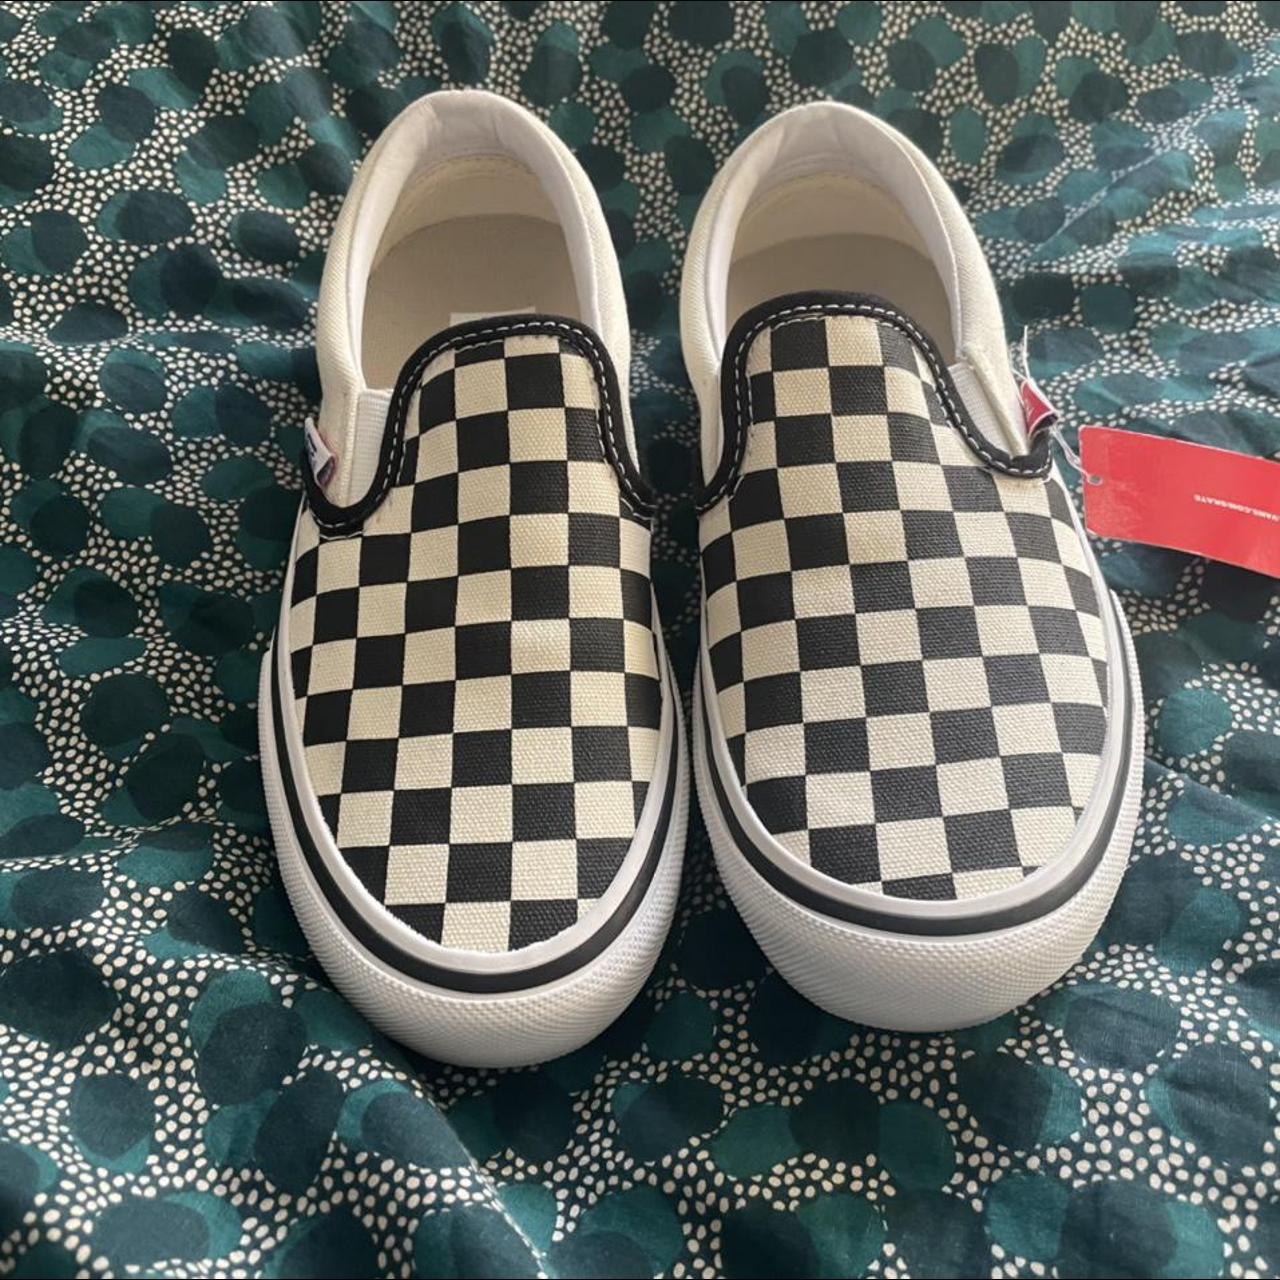 Product Image 2 - ON HOLD - BNWT Vans